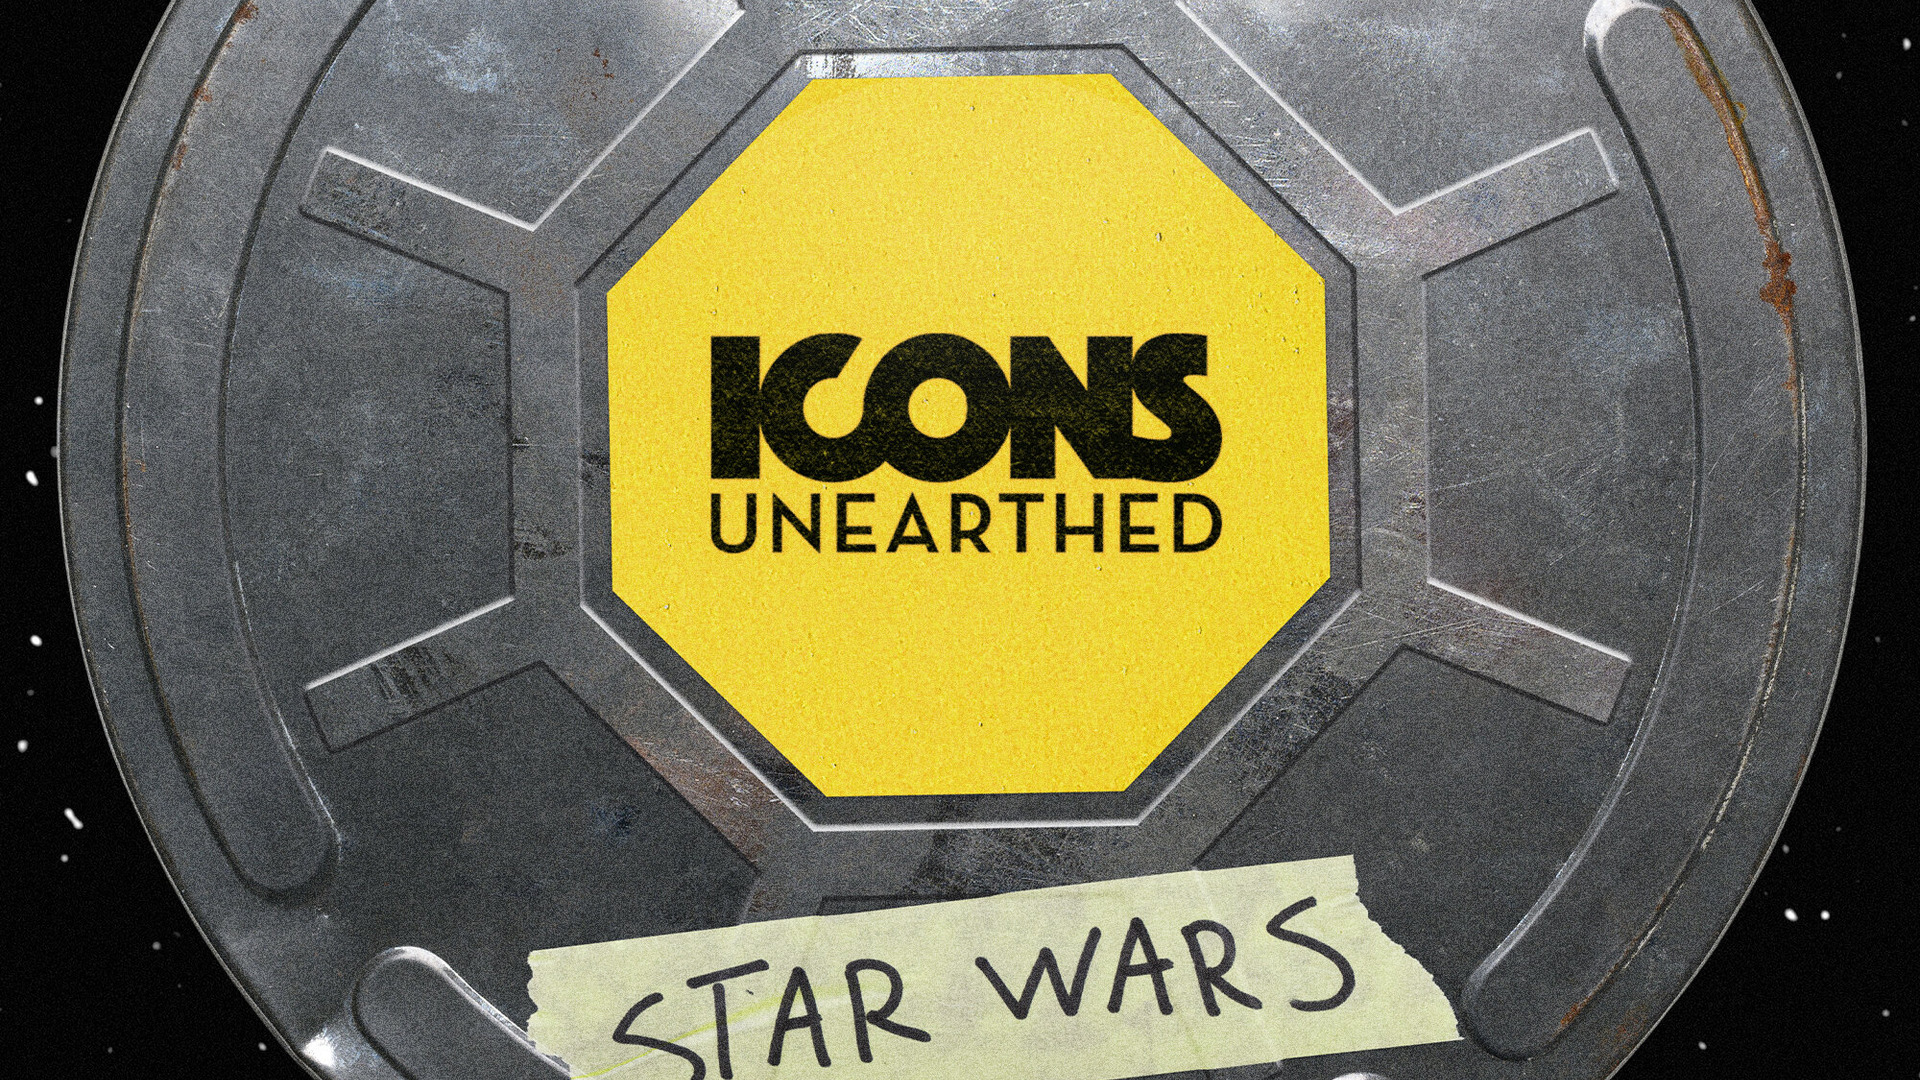 Show Icons Unearthed: Star Wars